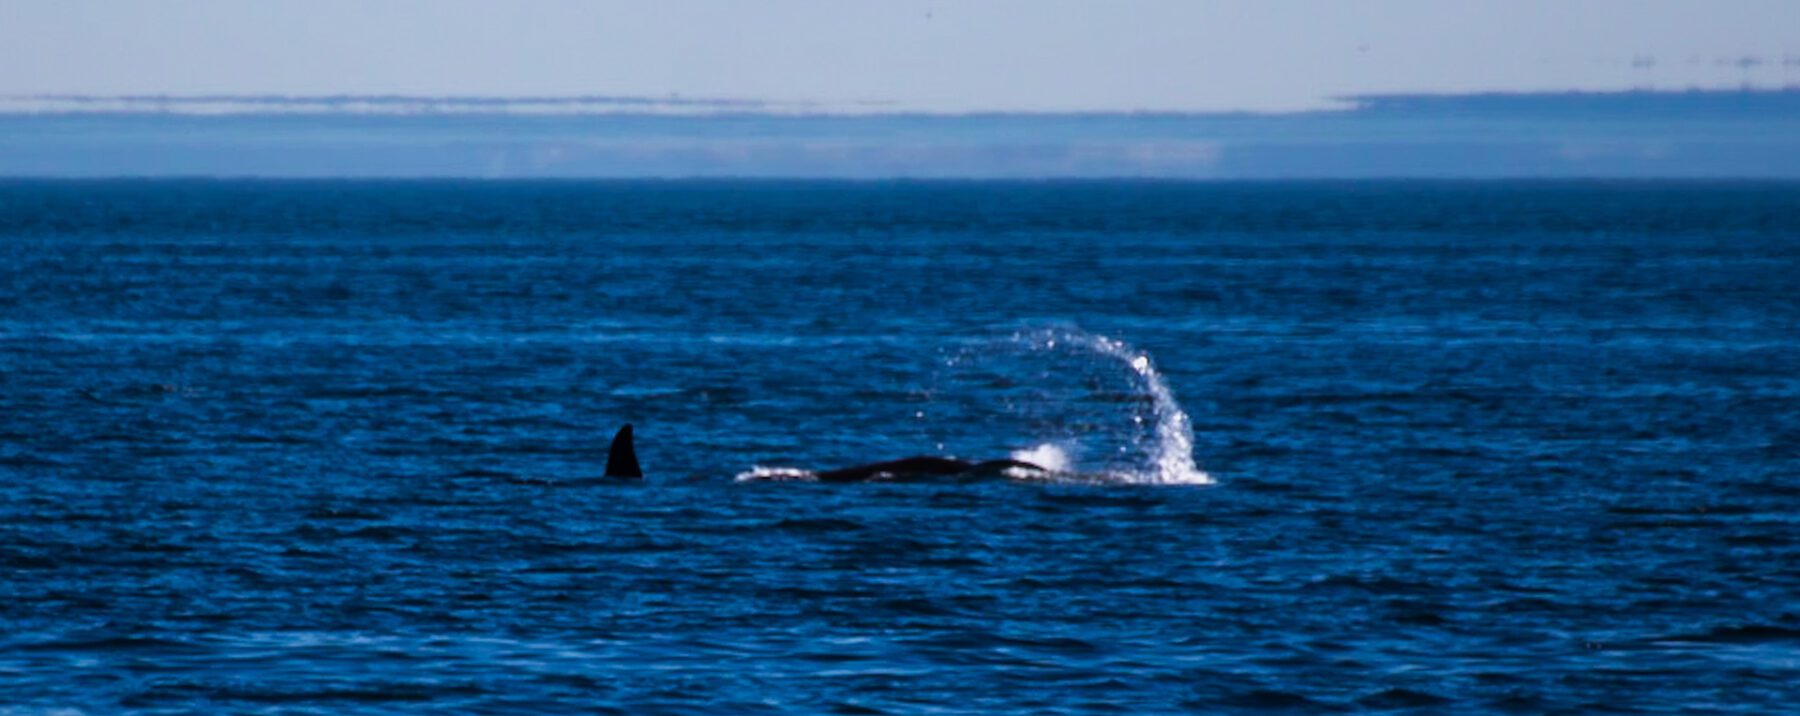 Two orca whales in the ocean with a Washington in the background.